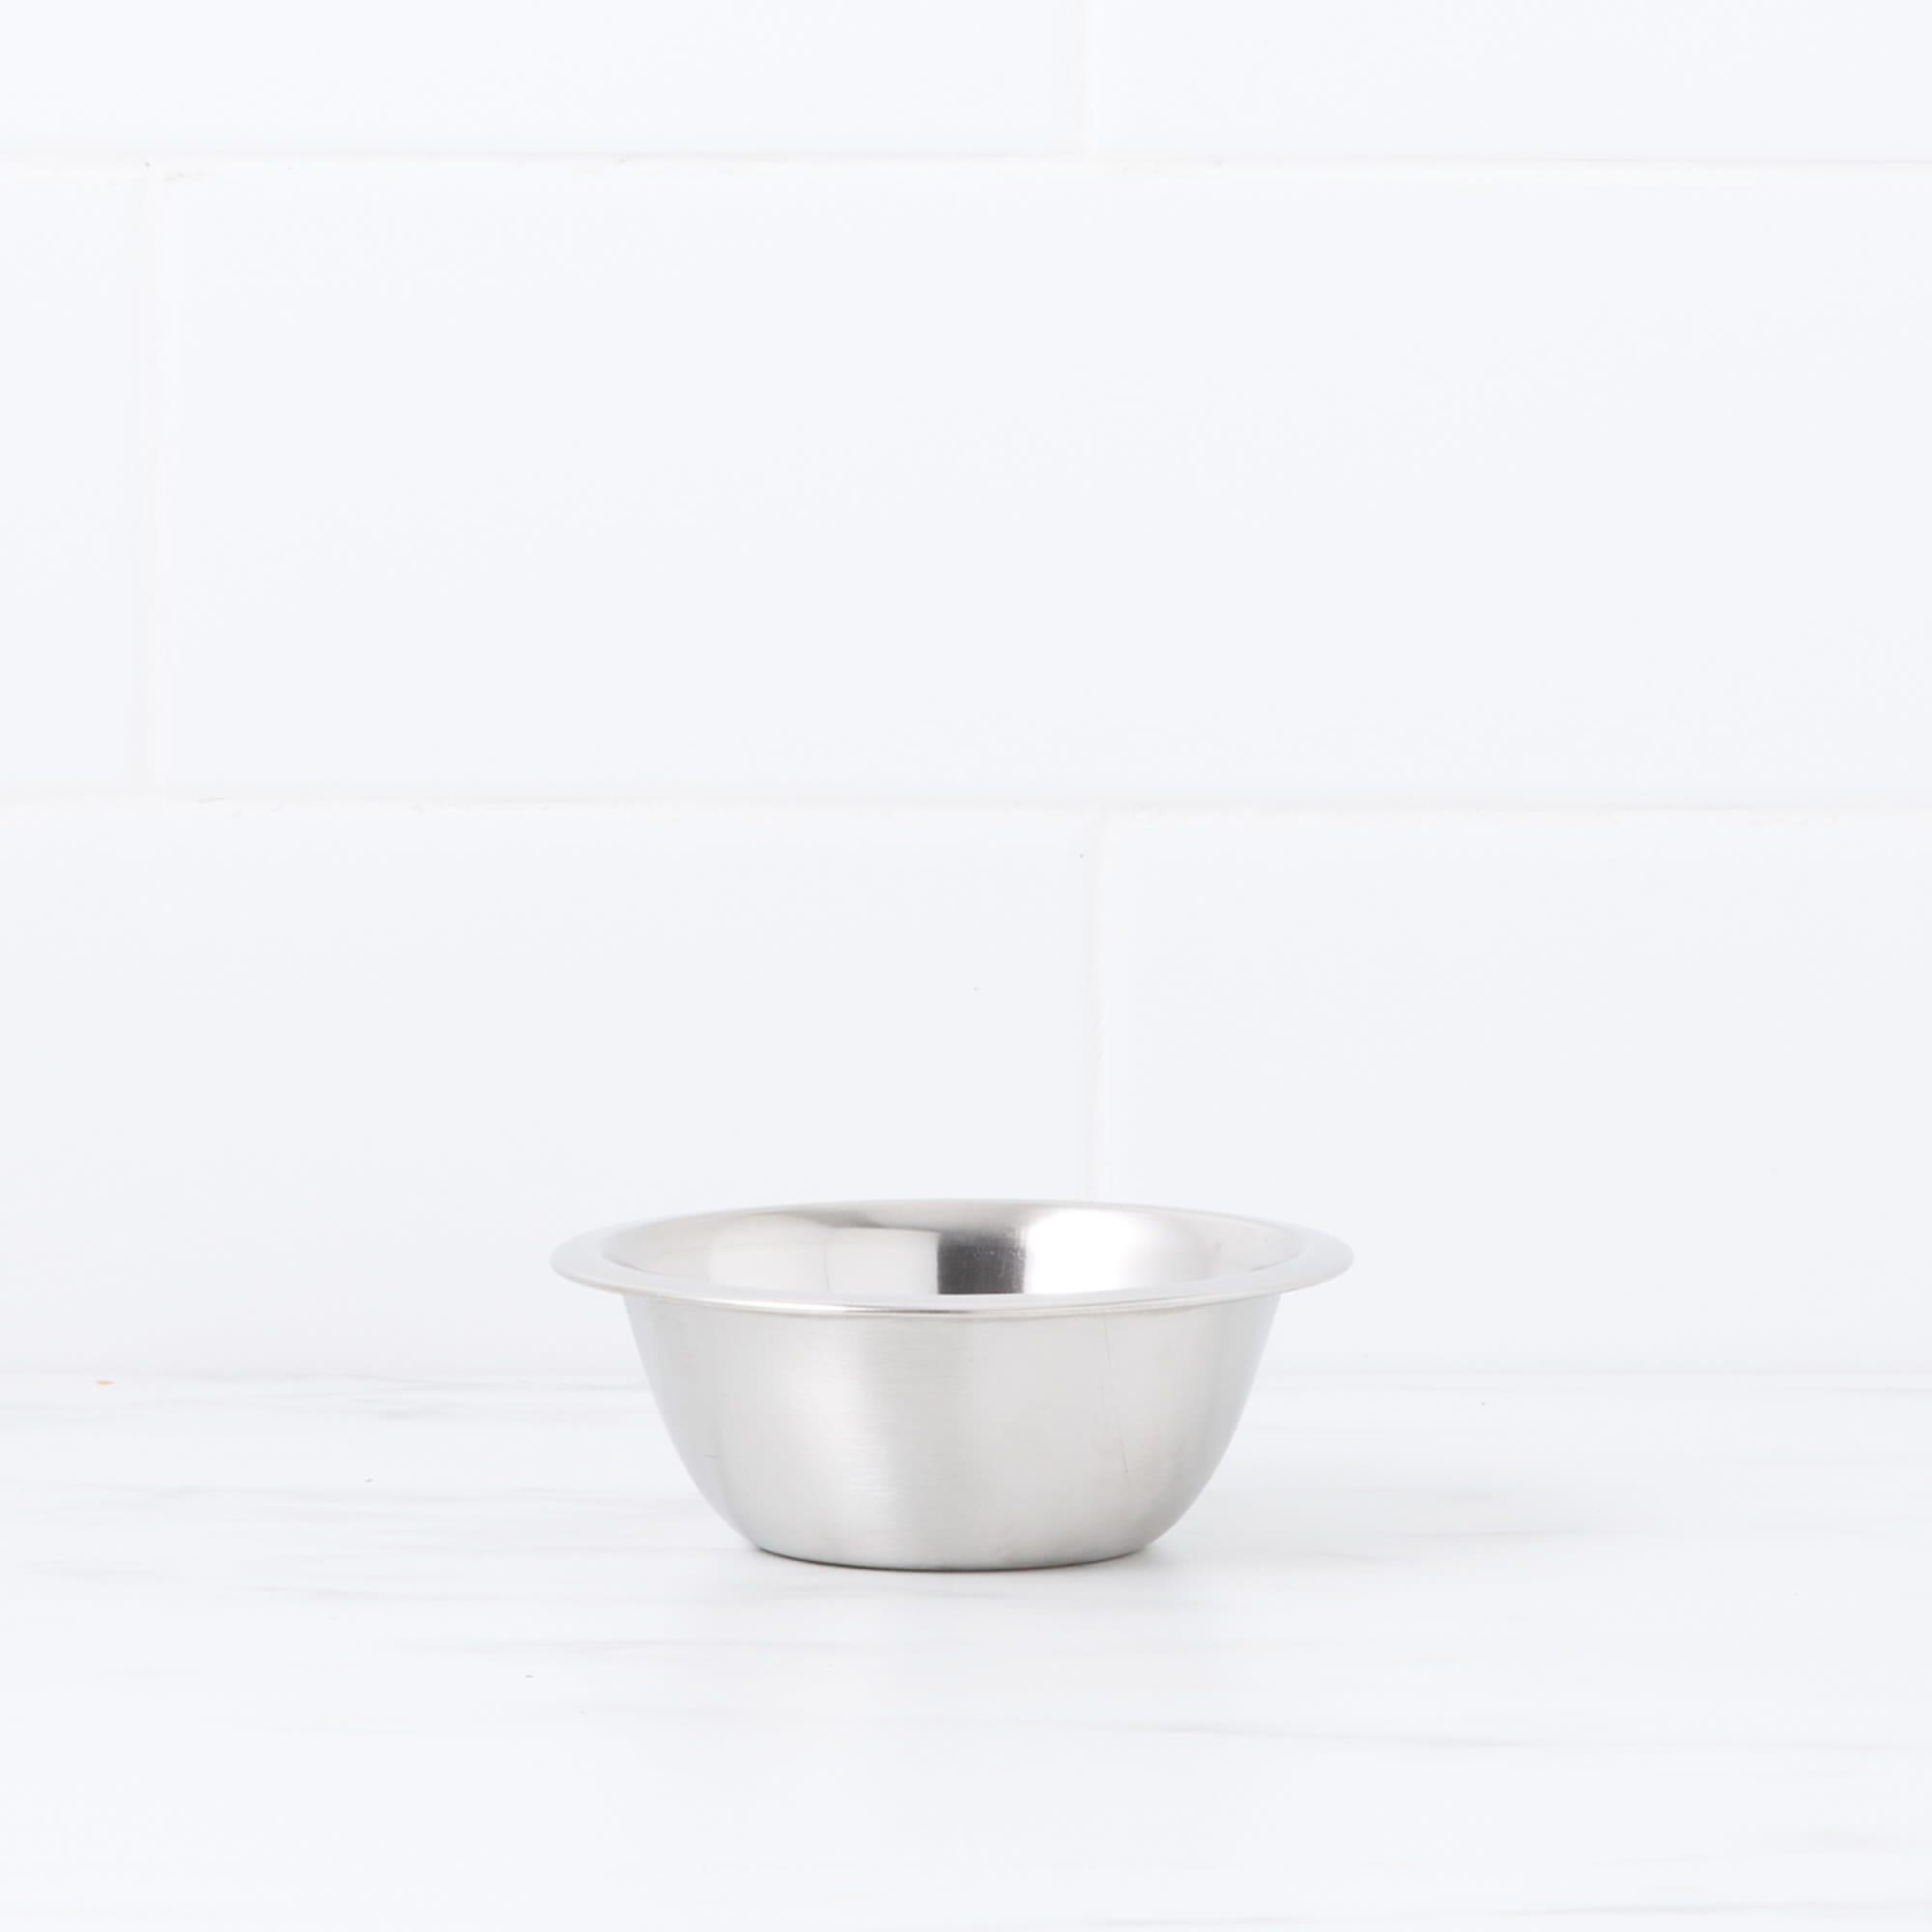 Kitchen Pro Mixwell Stainless Steel Mixing Bowl 12cm - 250ml Image 1